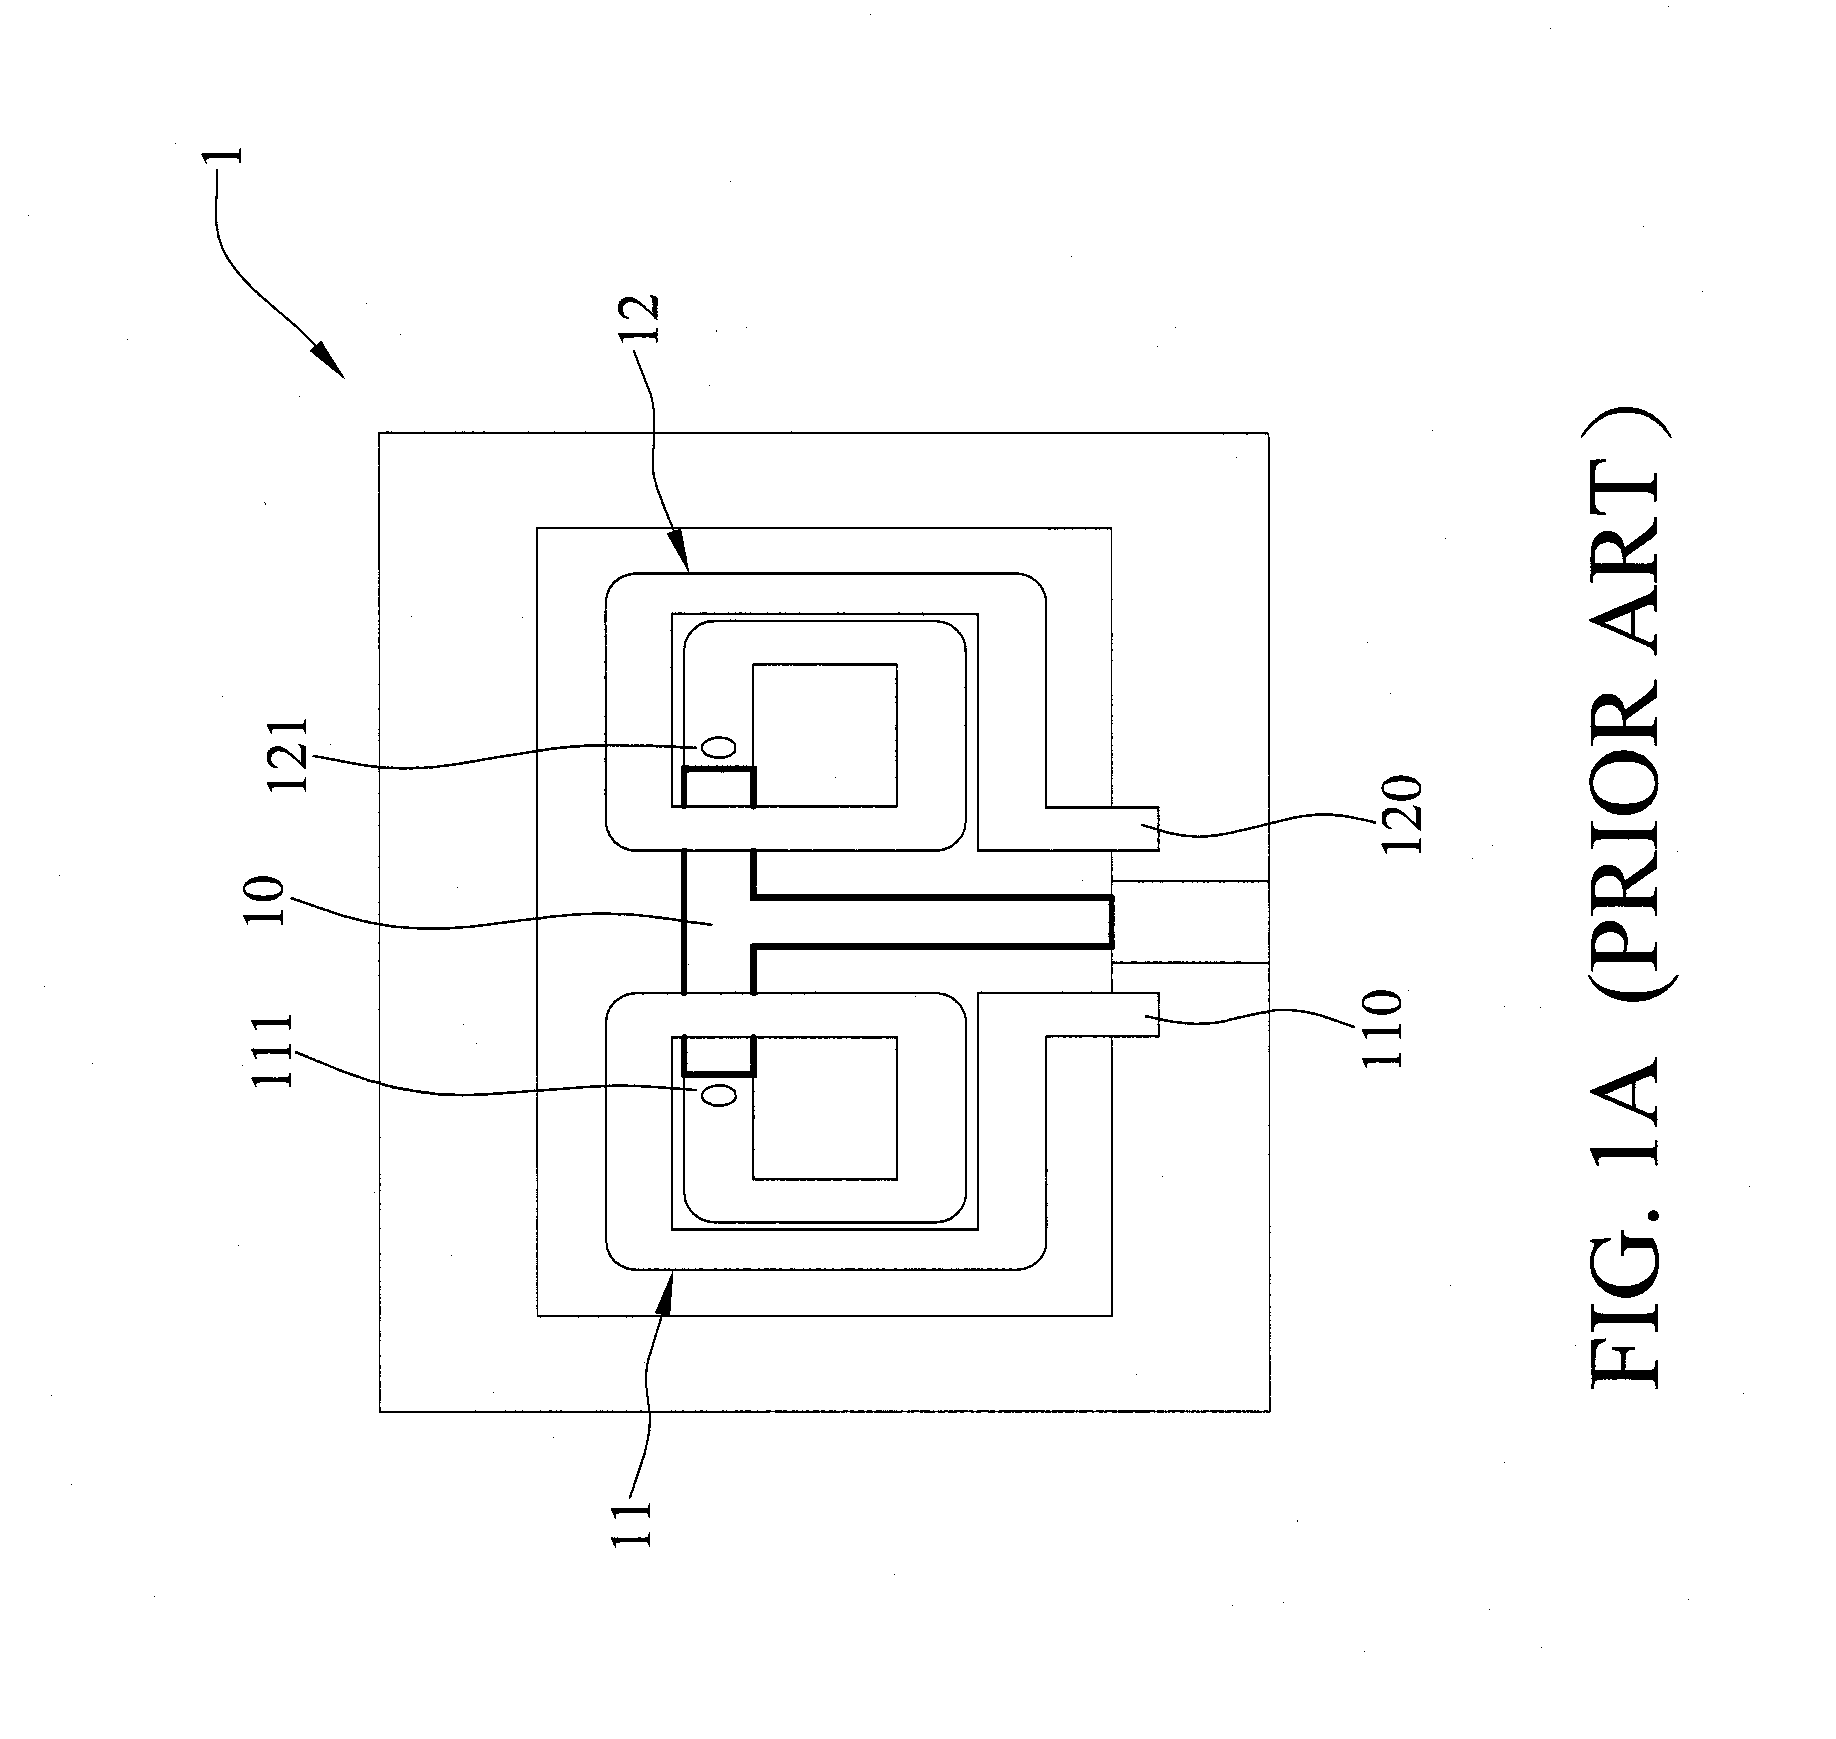 Symmetric differential inductor structure